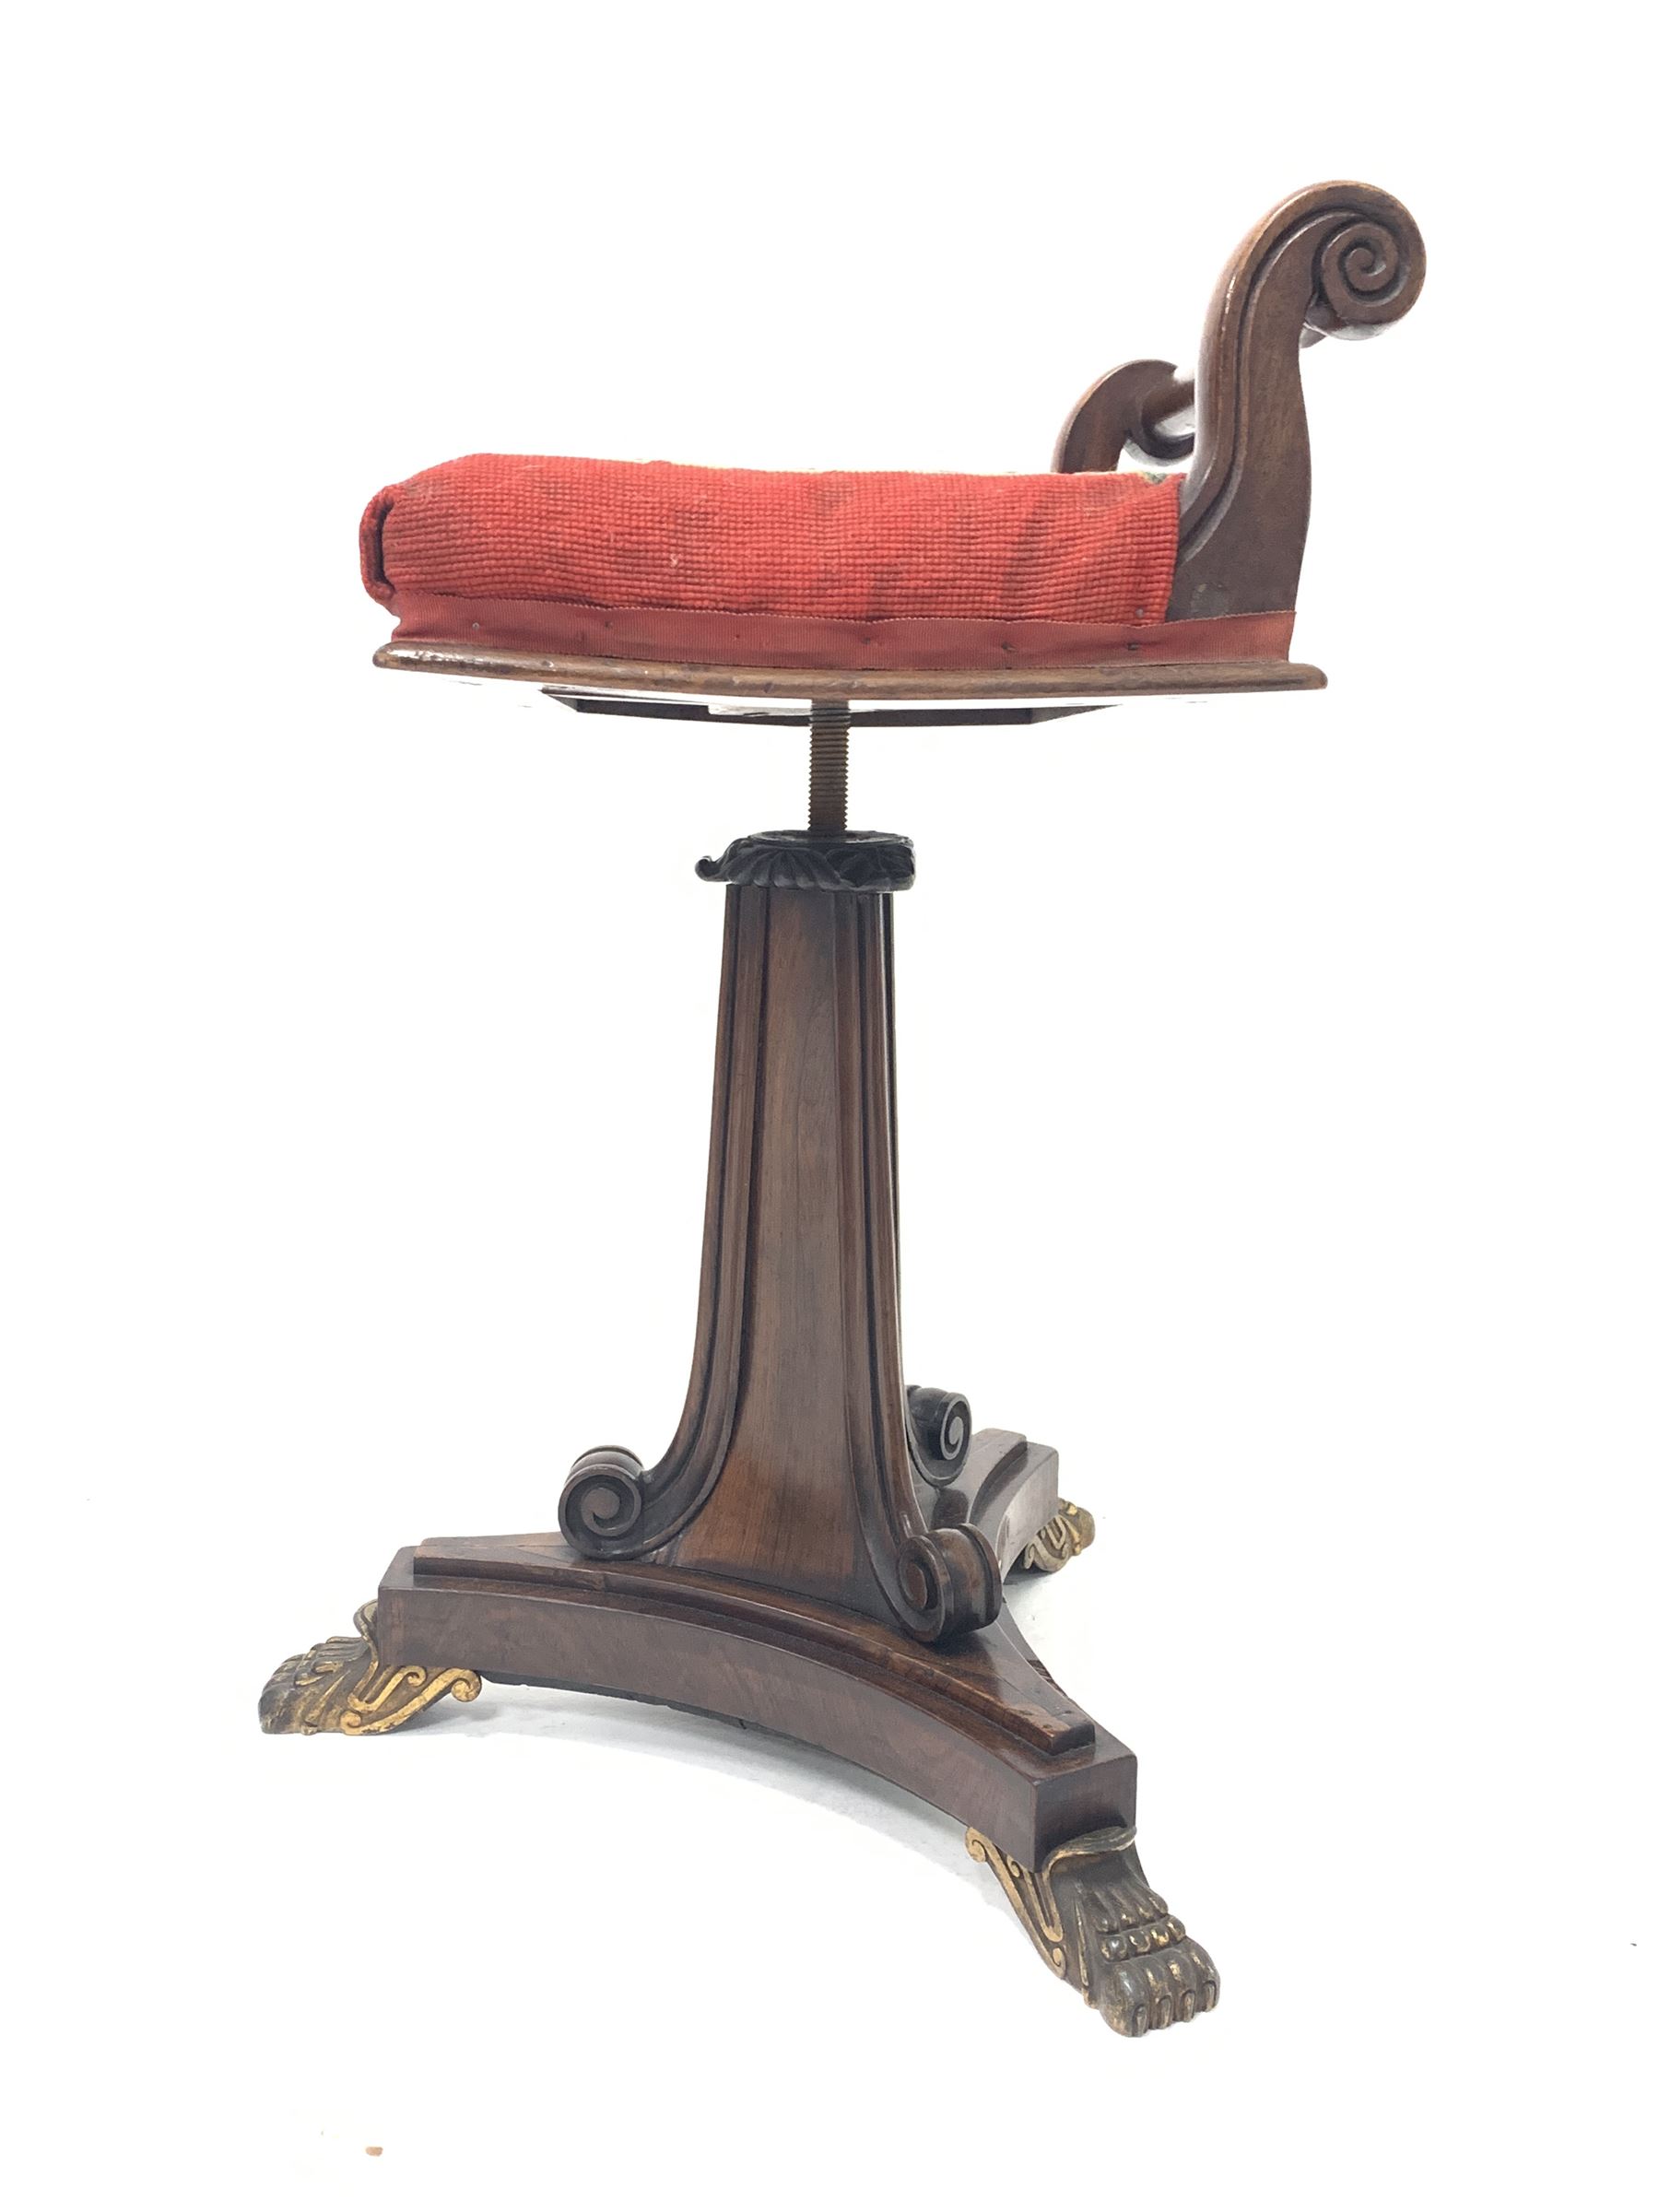 Regency rosewood rise and fall music stool - Image 2 of 2